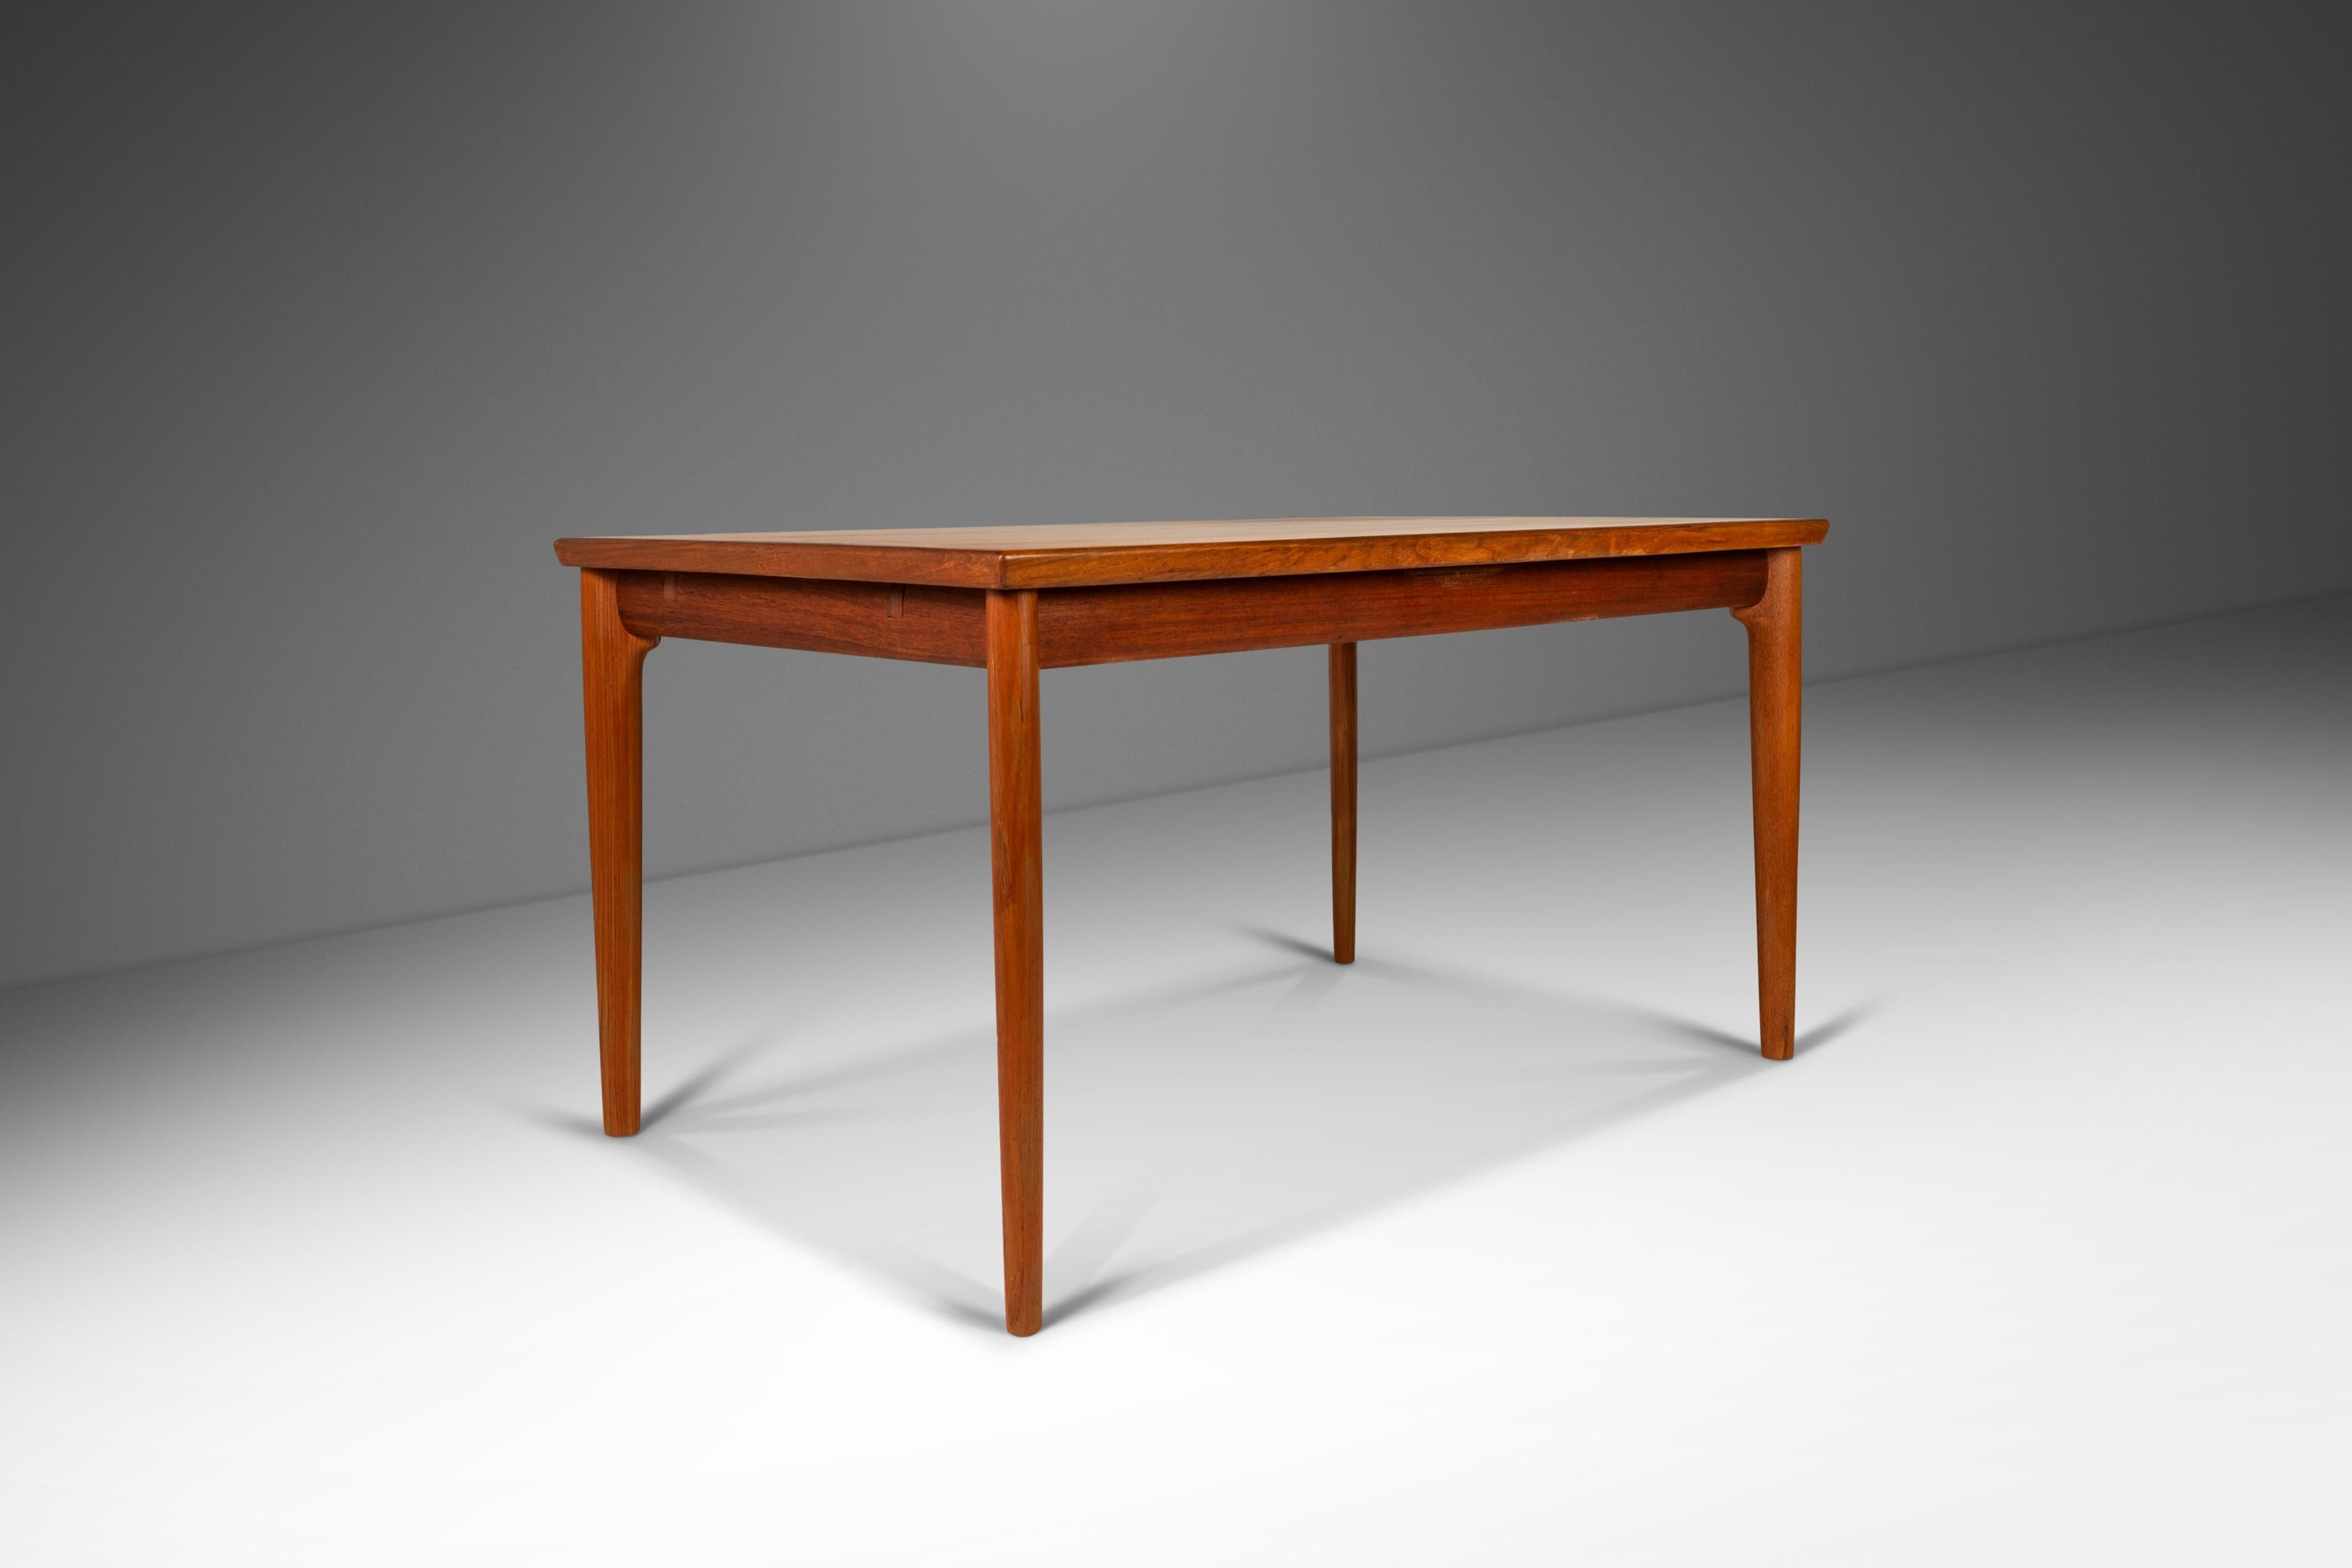 Danish Modern Expansion Dining Table in Teak w/ Stow-in-Table Leaves, c. 1960s For Sale 6